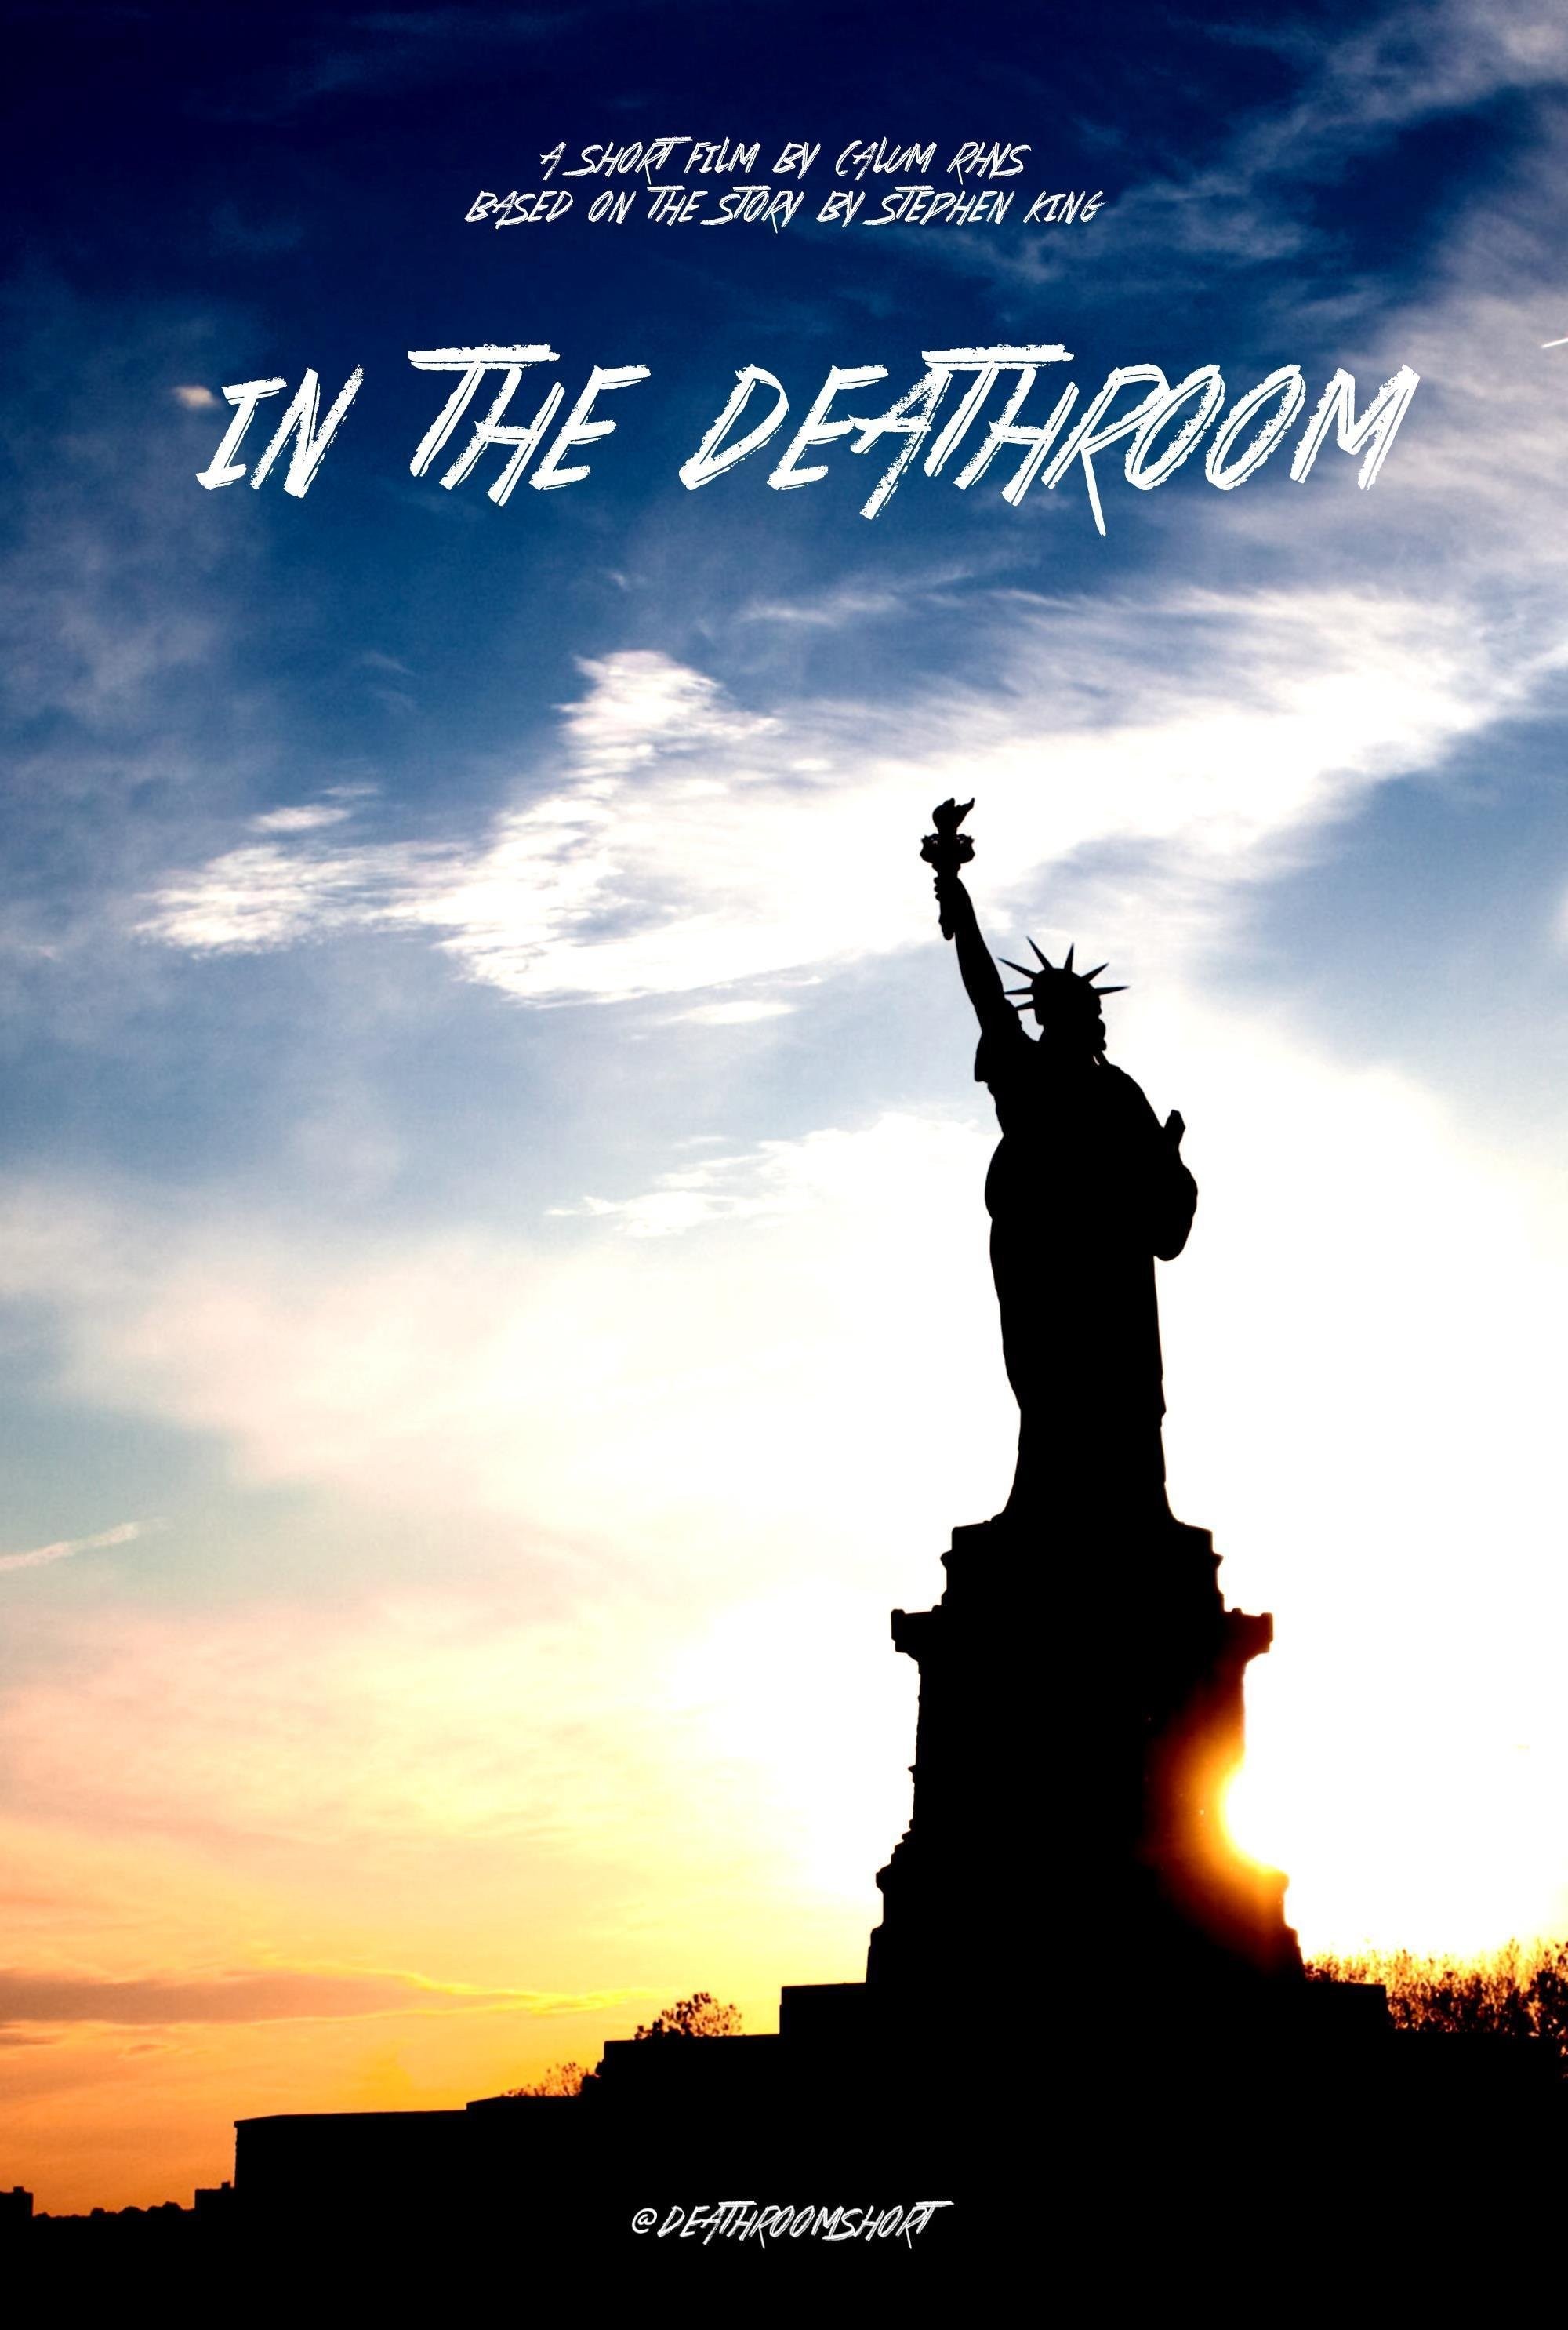 Mega Sized Movie Poster Image for In the Deathroom